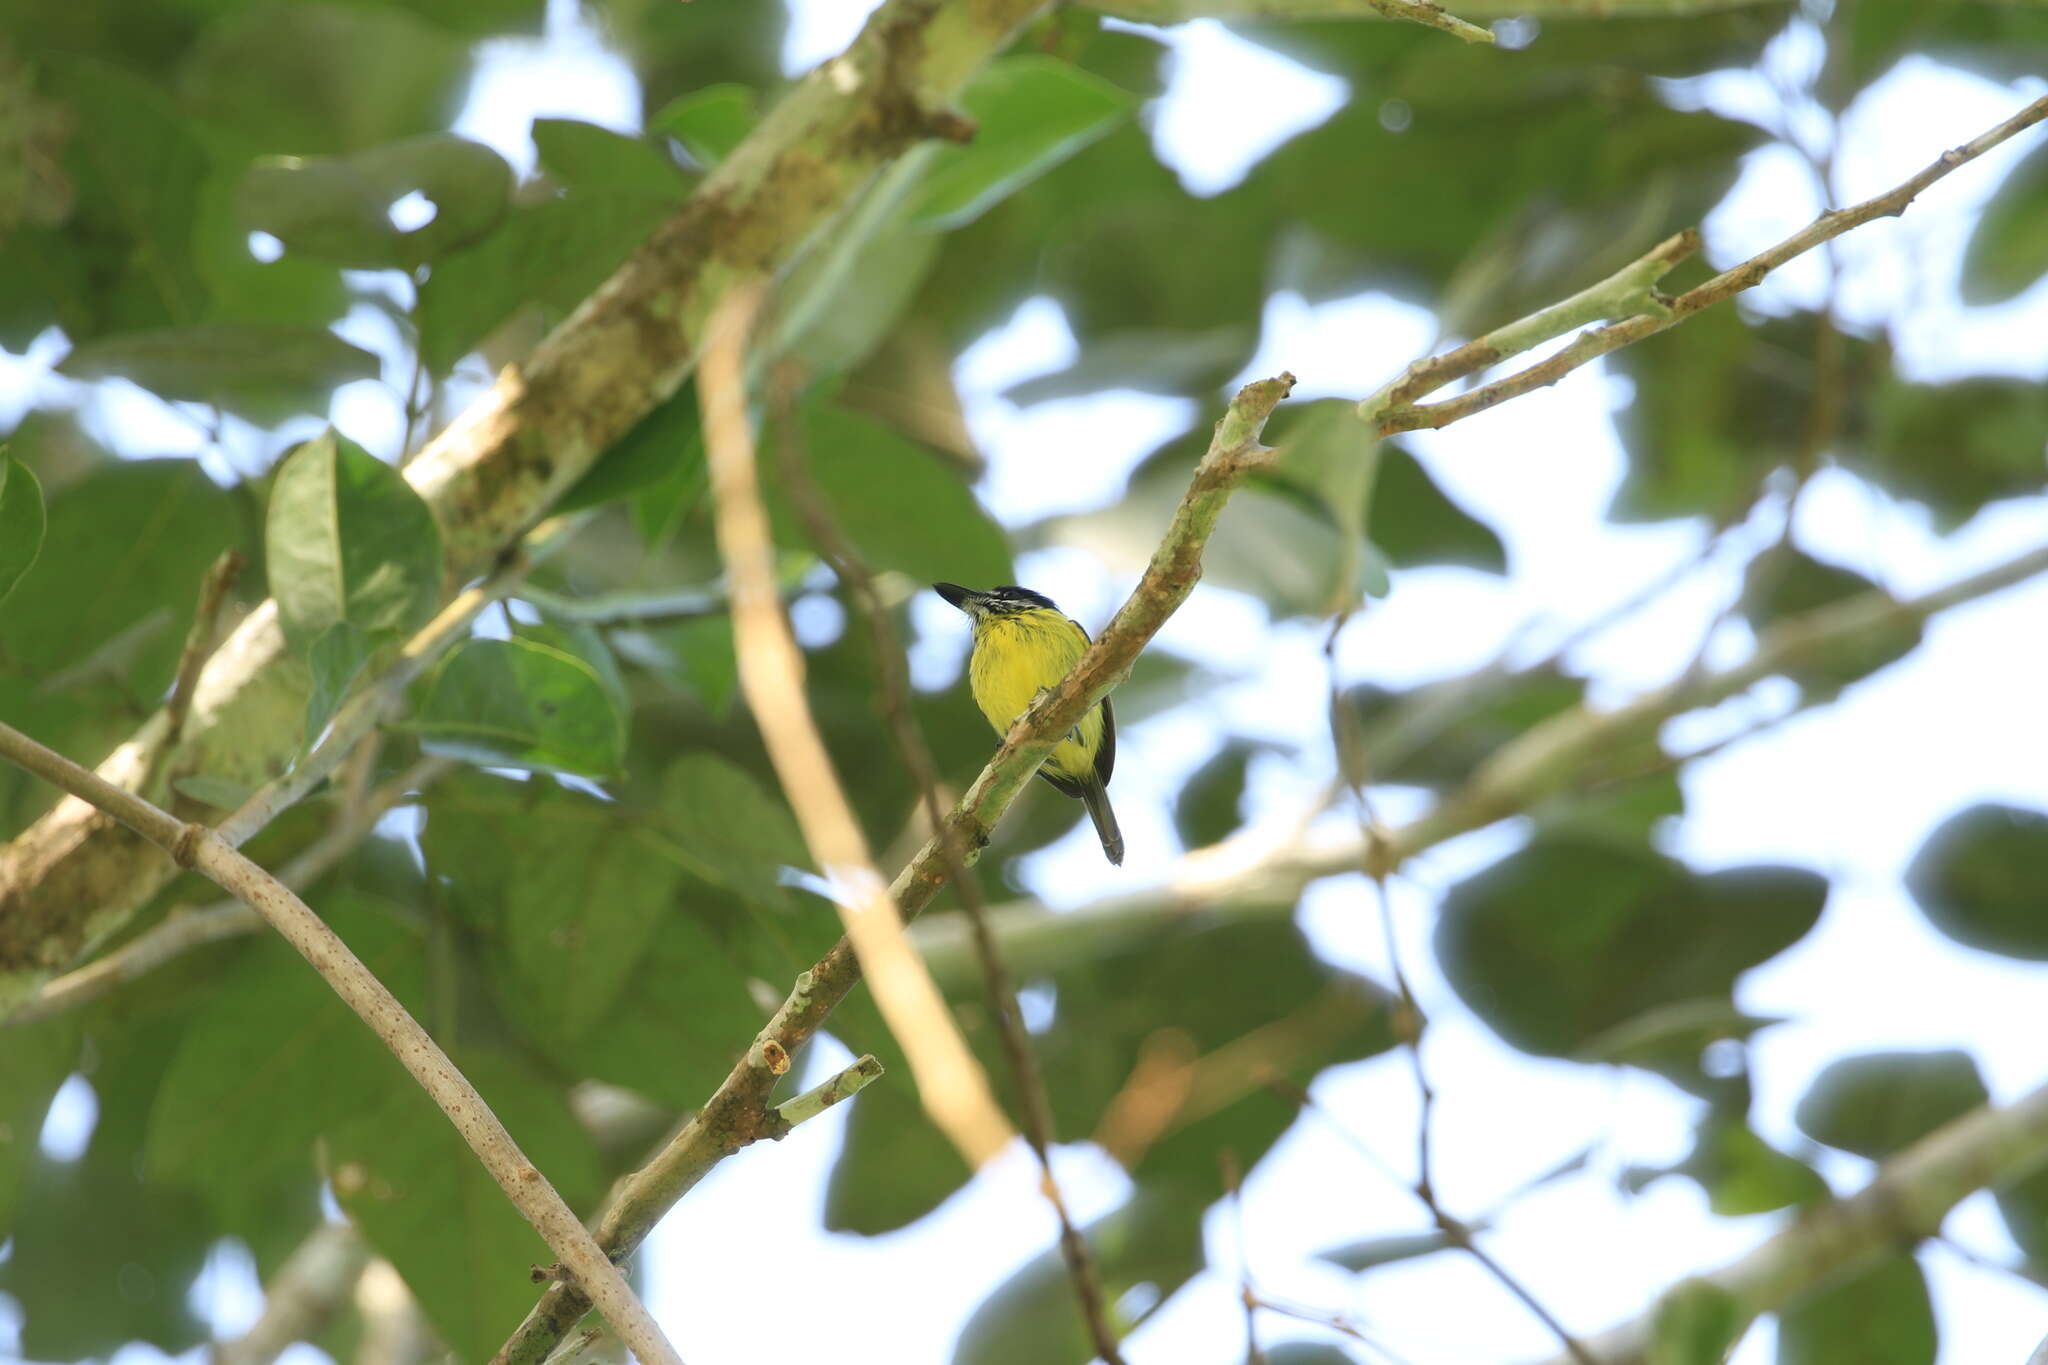 Image of Painted Tody-Flycatcher